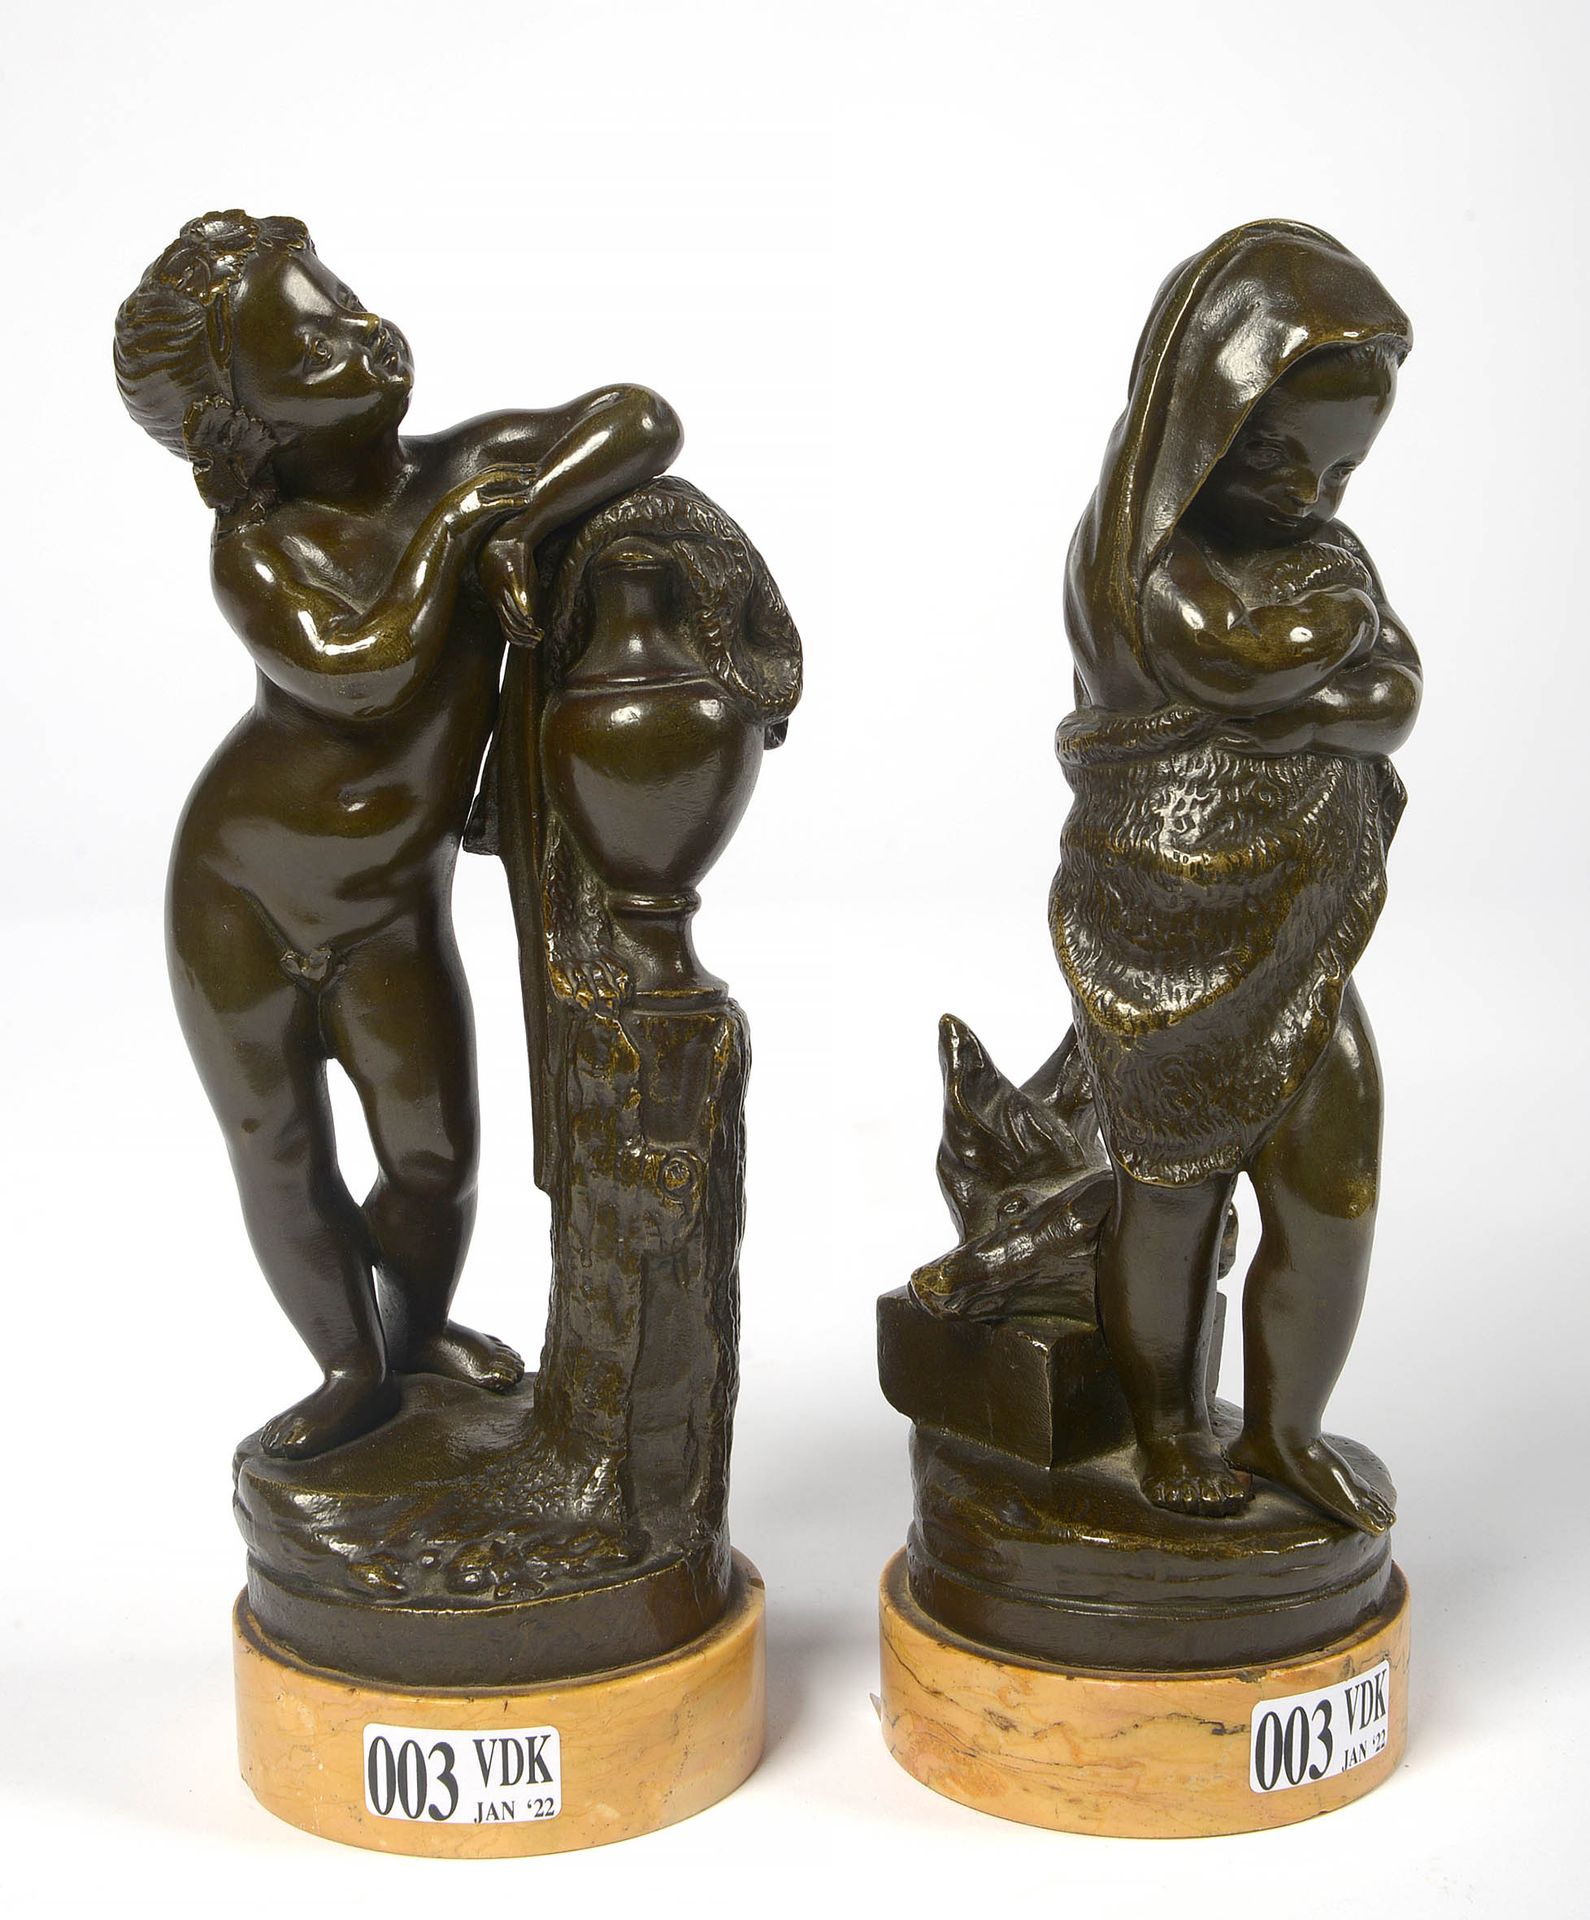 CLODION (1738 - 1814). D'après. Set of two sculptures : "Winter Allegory" and "S&hellip;